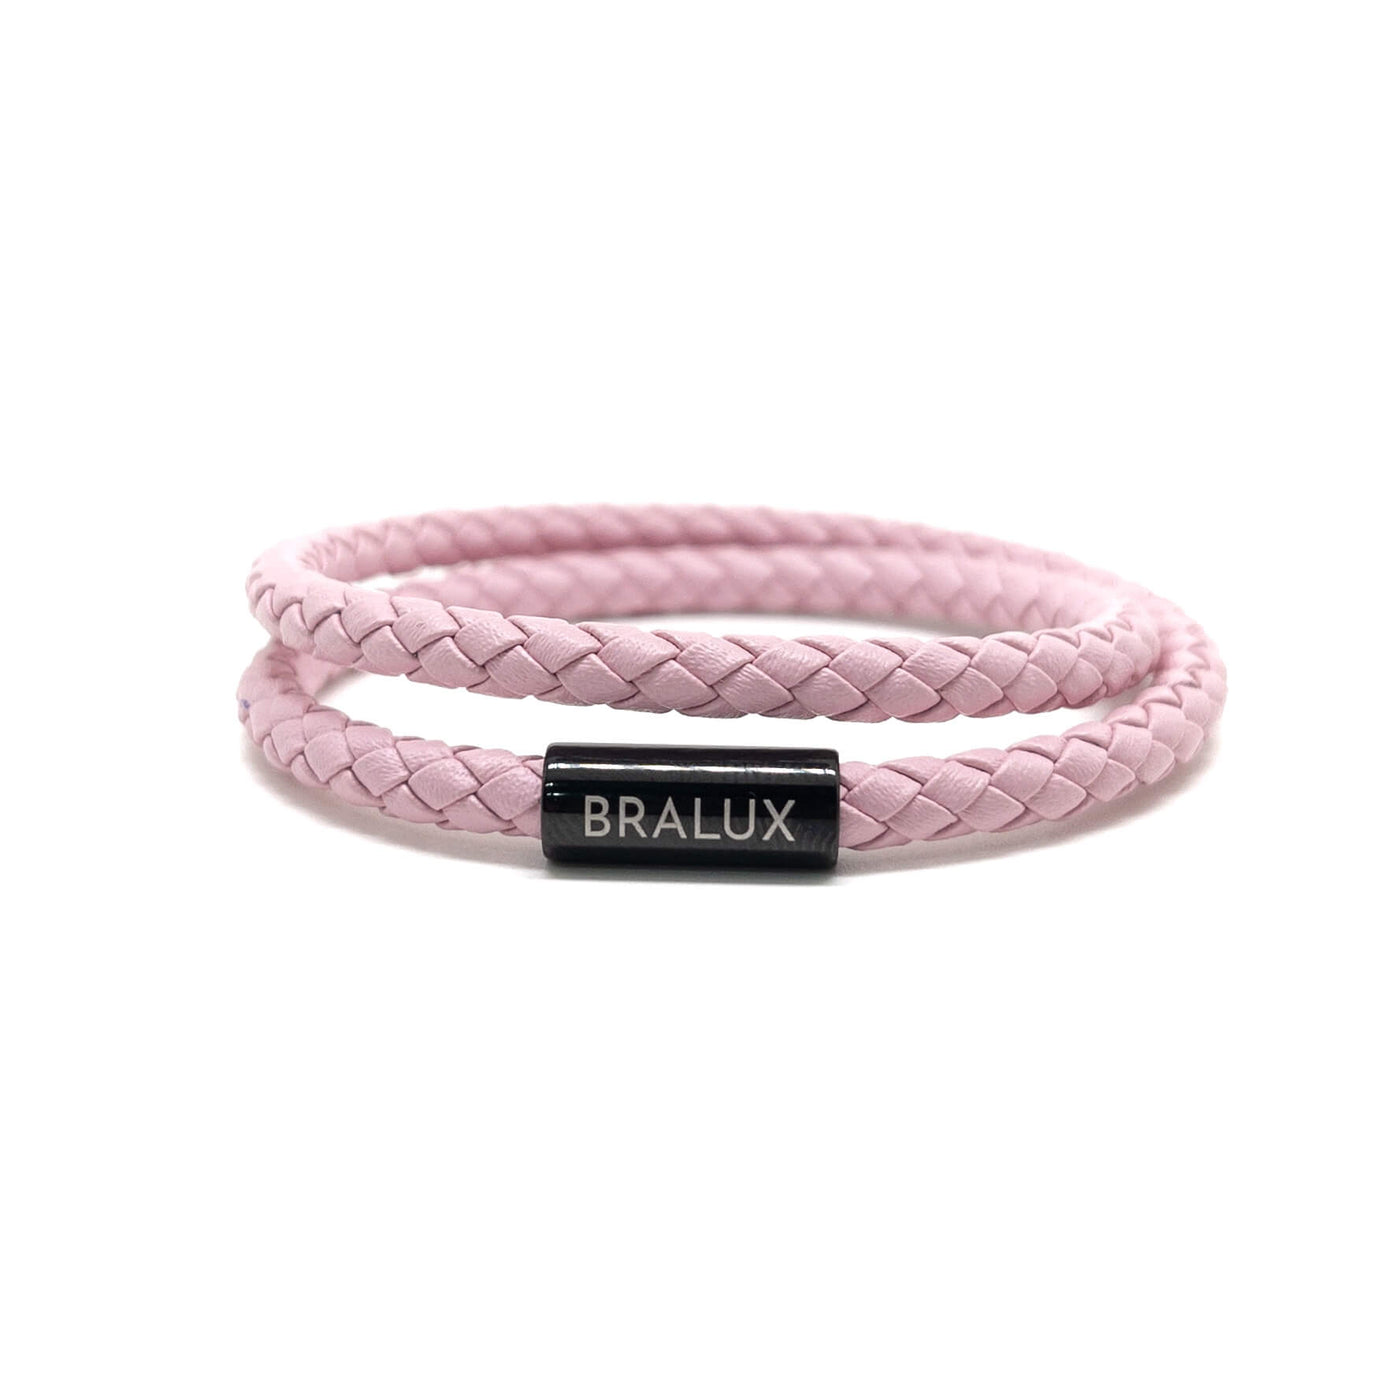 The Duo Pink Leather Bracelet